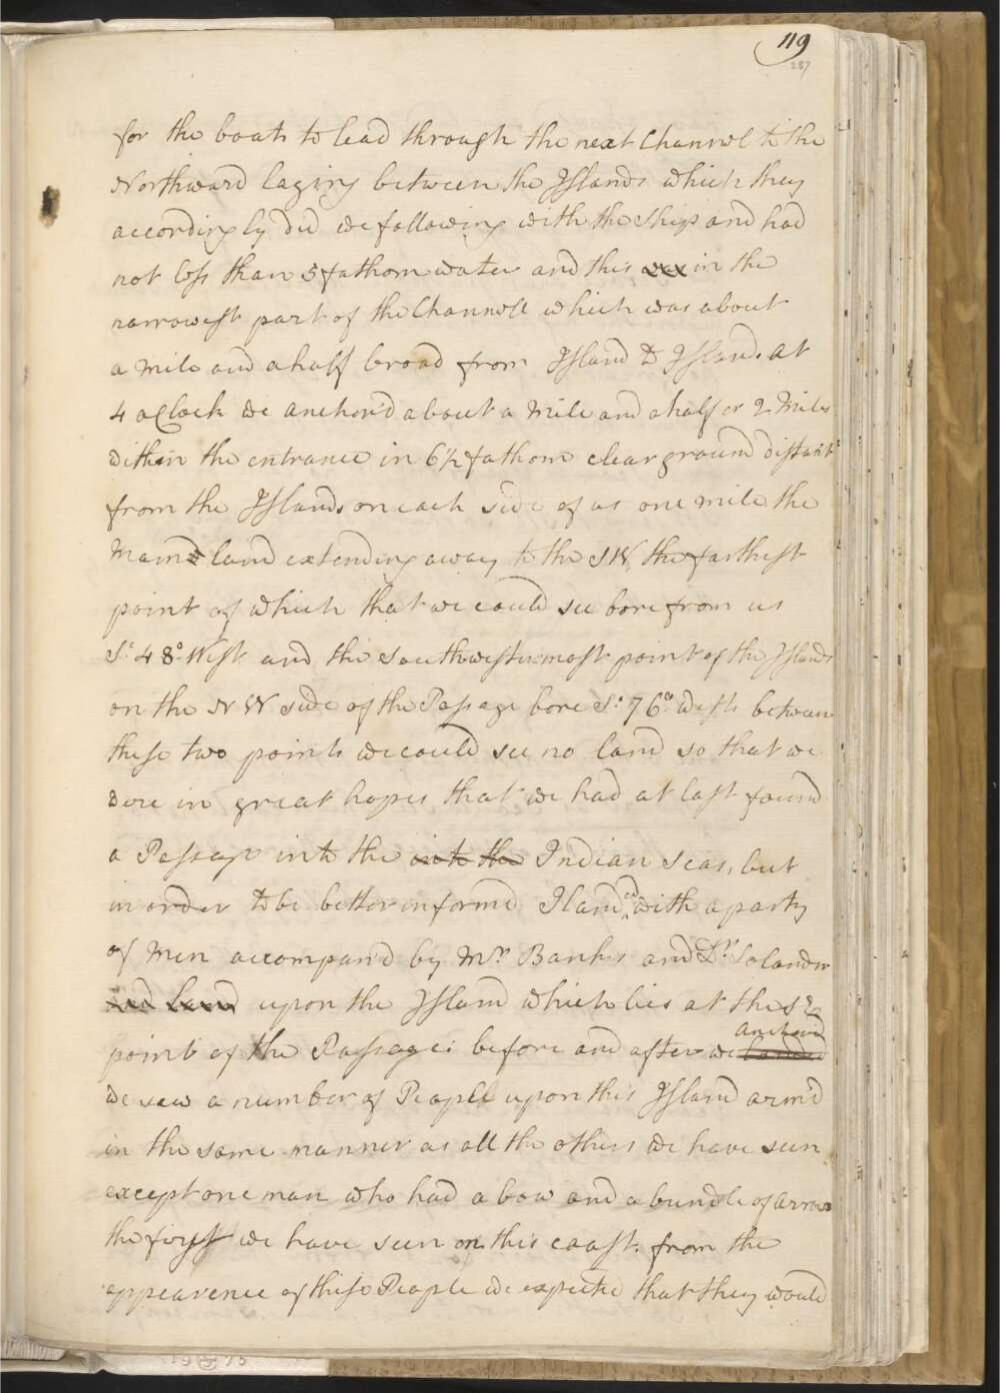 Image of Lt Cook's Endeavour Journal 22 August 1770 Possession Island - Courtesy of the National Library of Australia